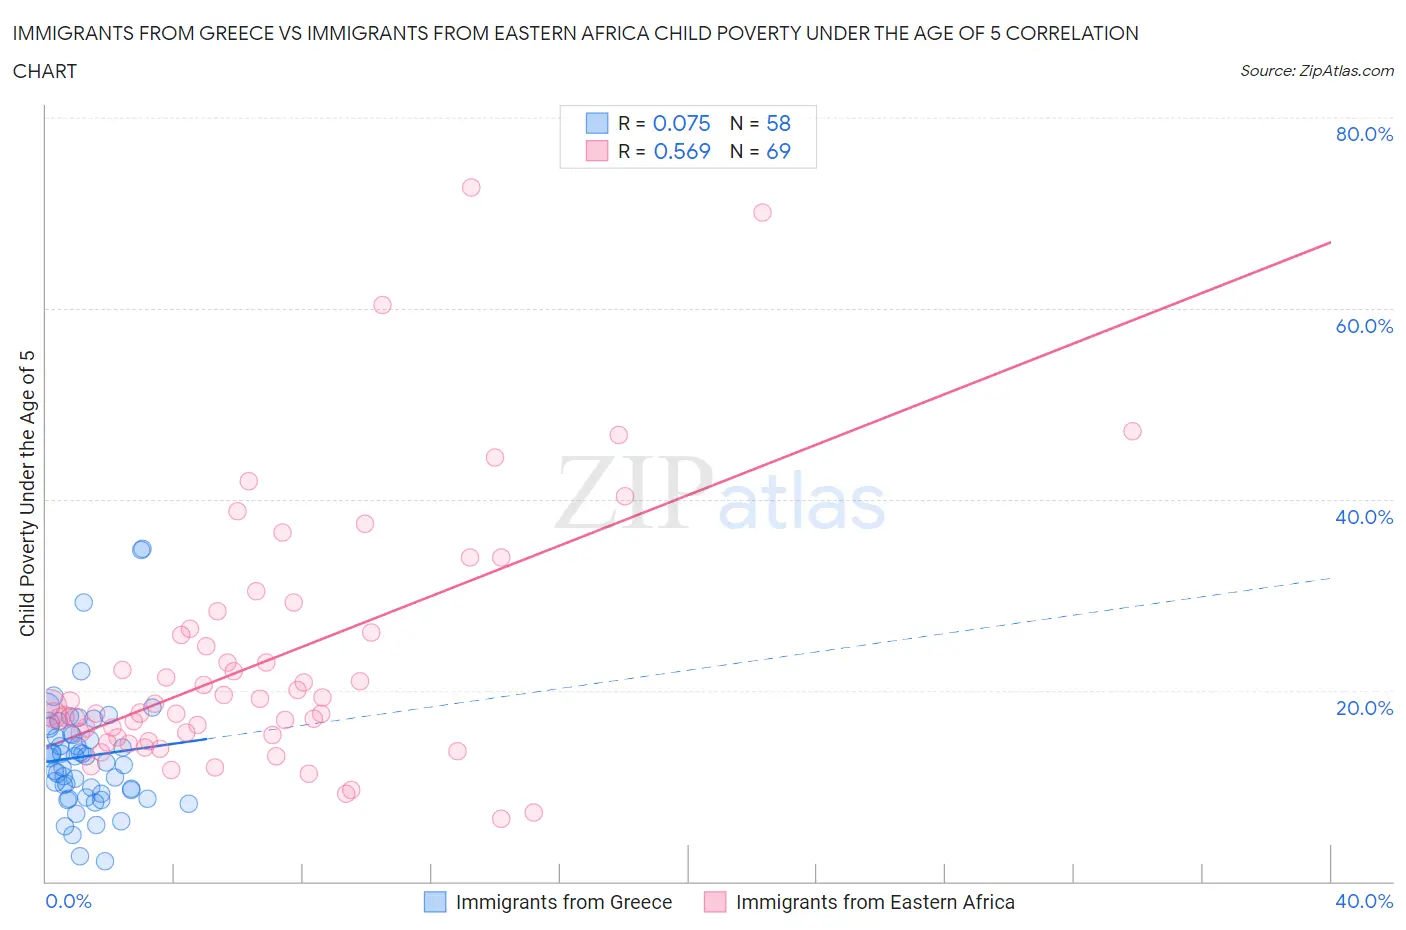 Immigrants from Greece vs Immigrants from Eastern Africa Child Poverty Under the Age of 5